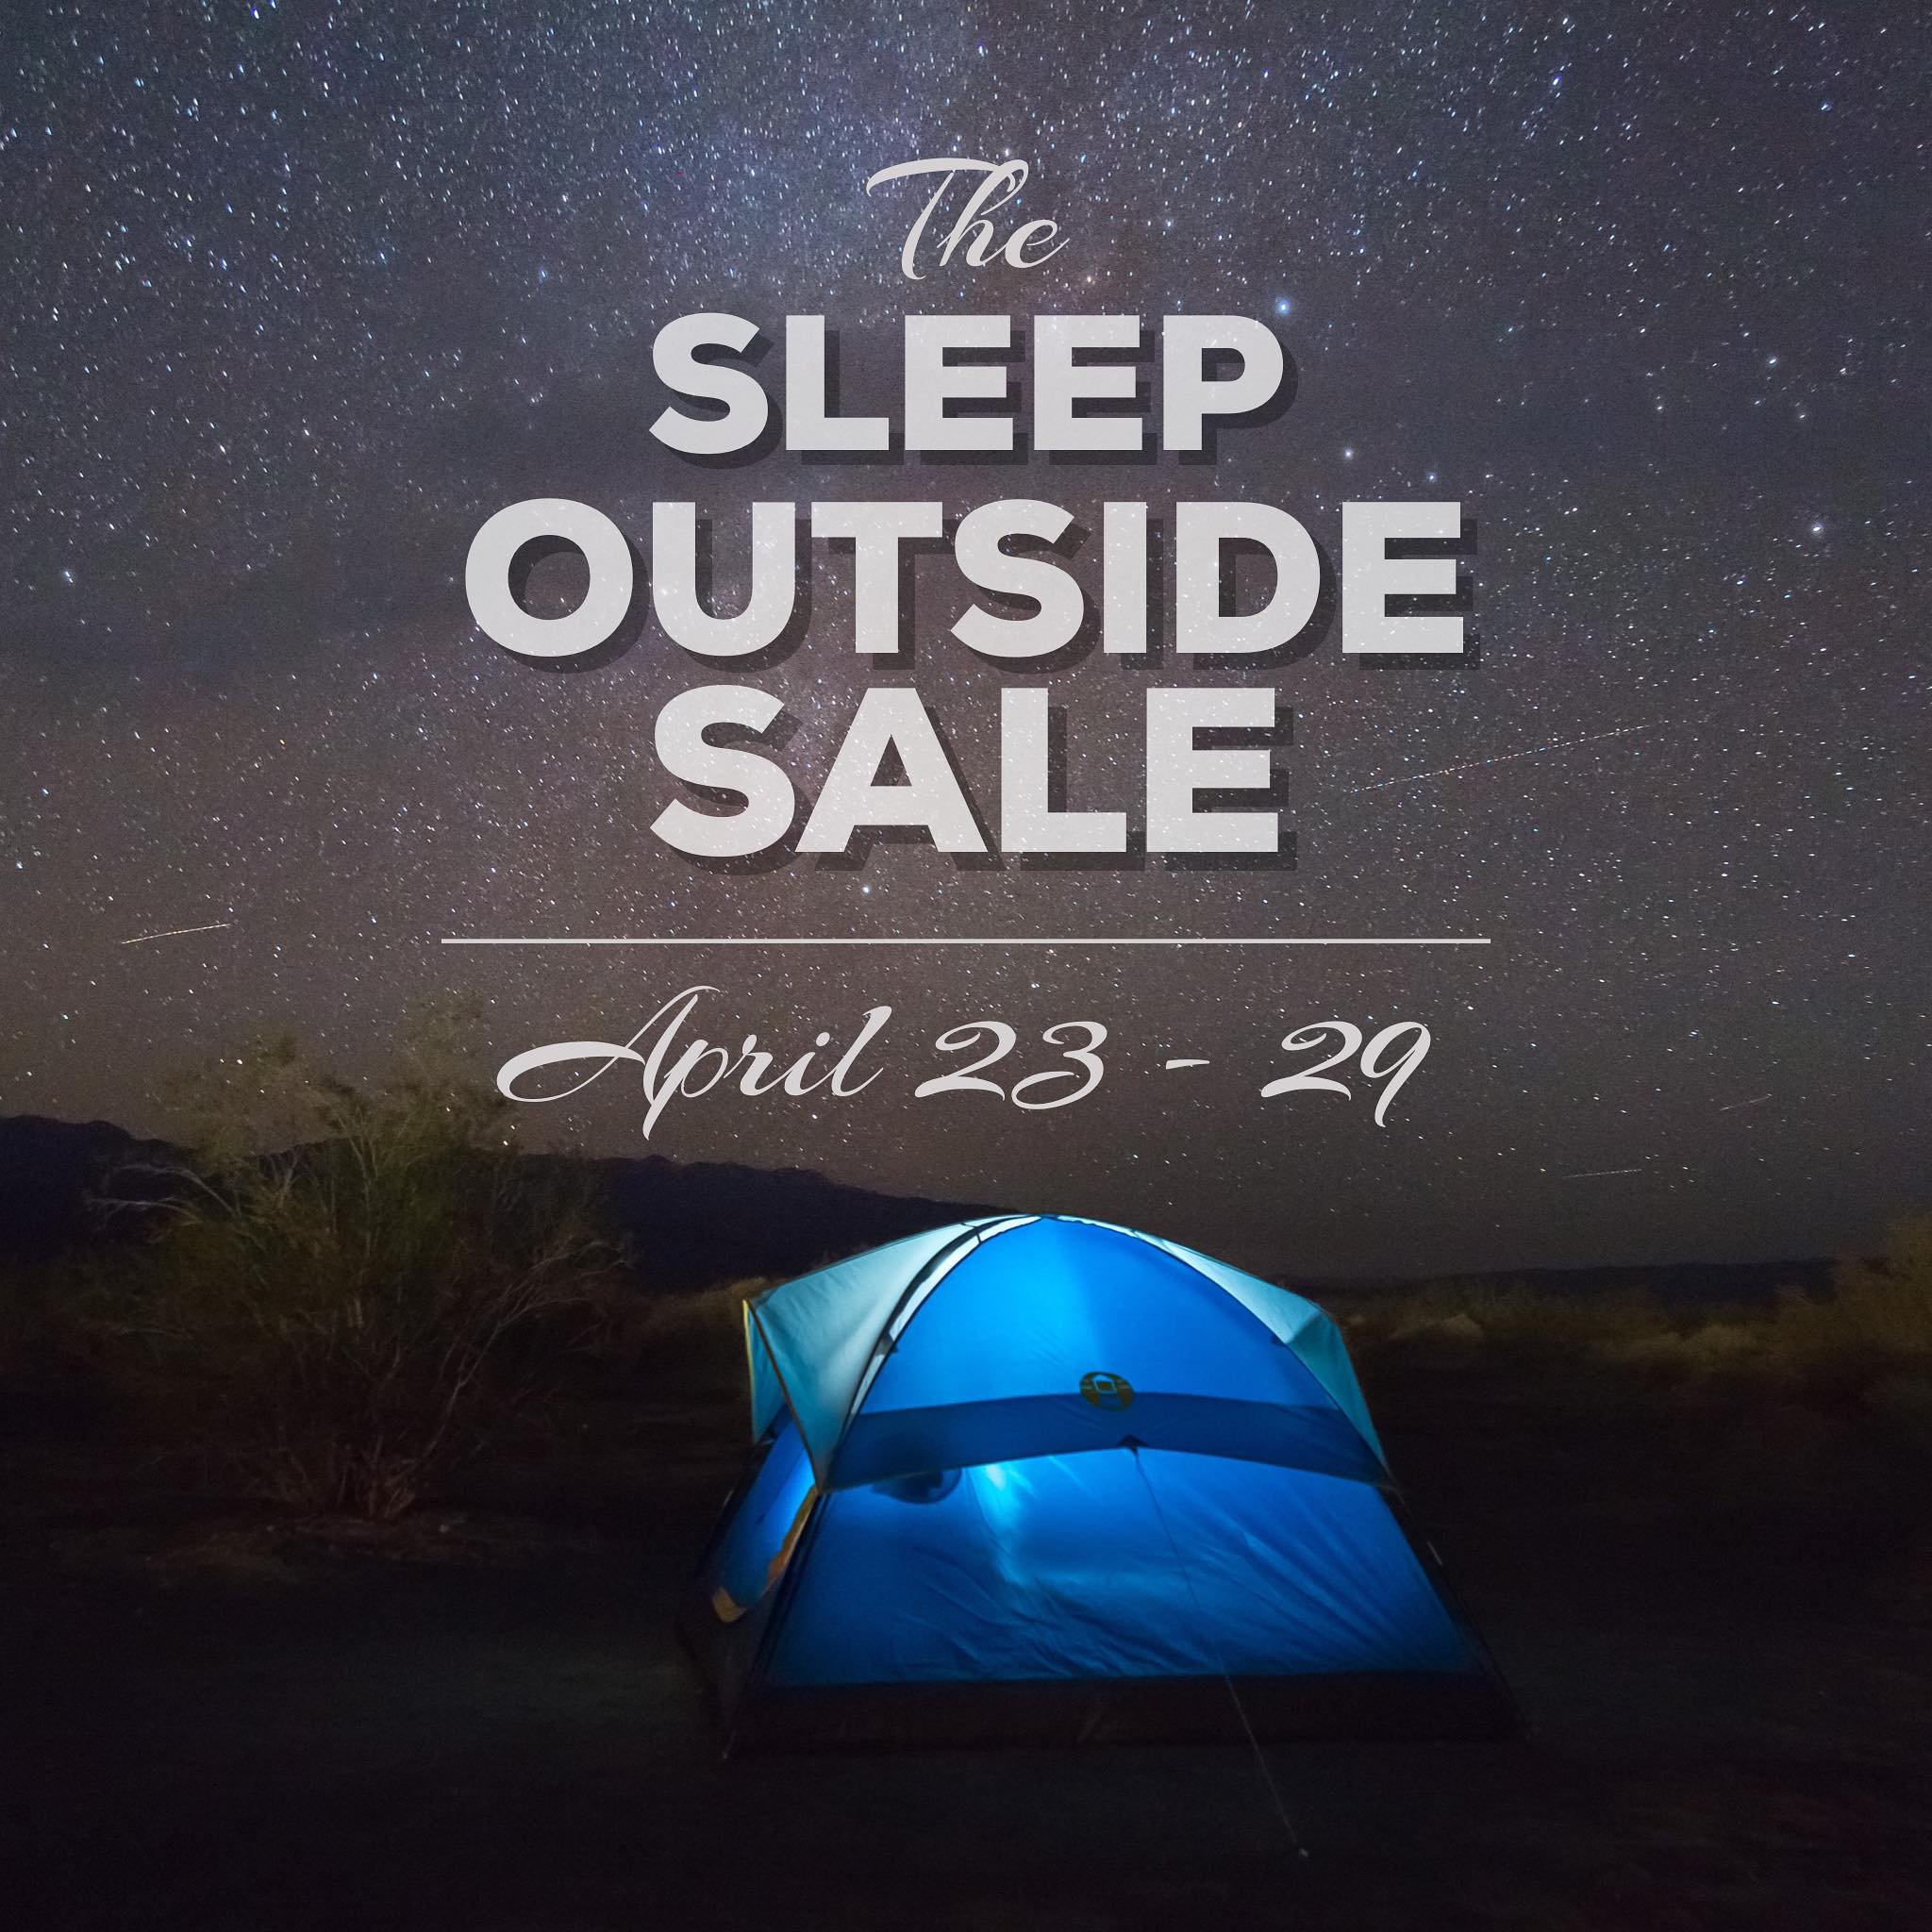 🏕️ Deals for people who sleep outside, and the people who love them:

&bull; 20% OFF ALL SLEEPING BAGS
&bull; 20% OFF ALL SLEEPING PADS
&bull; 20% OFF ALL SEA TO SUMMIT PRODUCTS

Now through April 29th. Includes in-stock, reg-prices items.